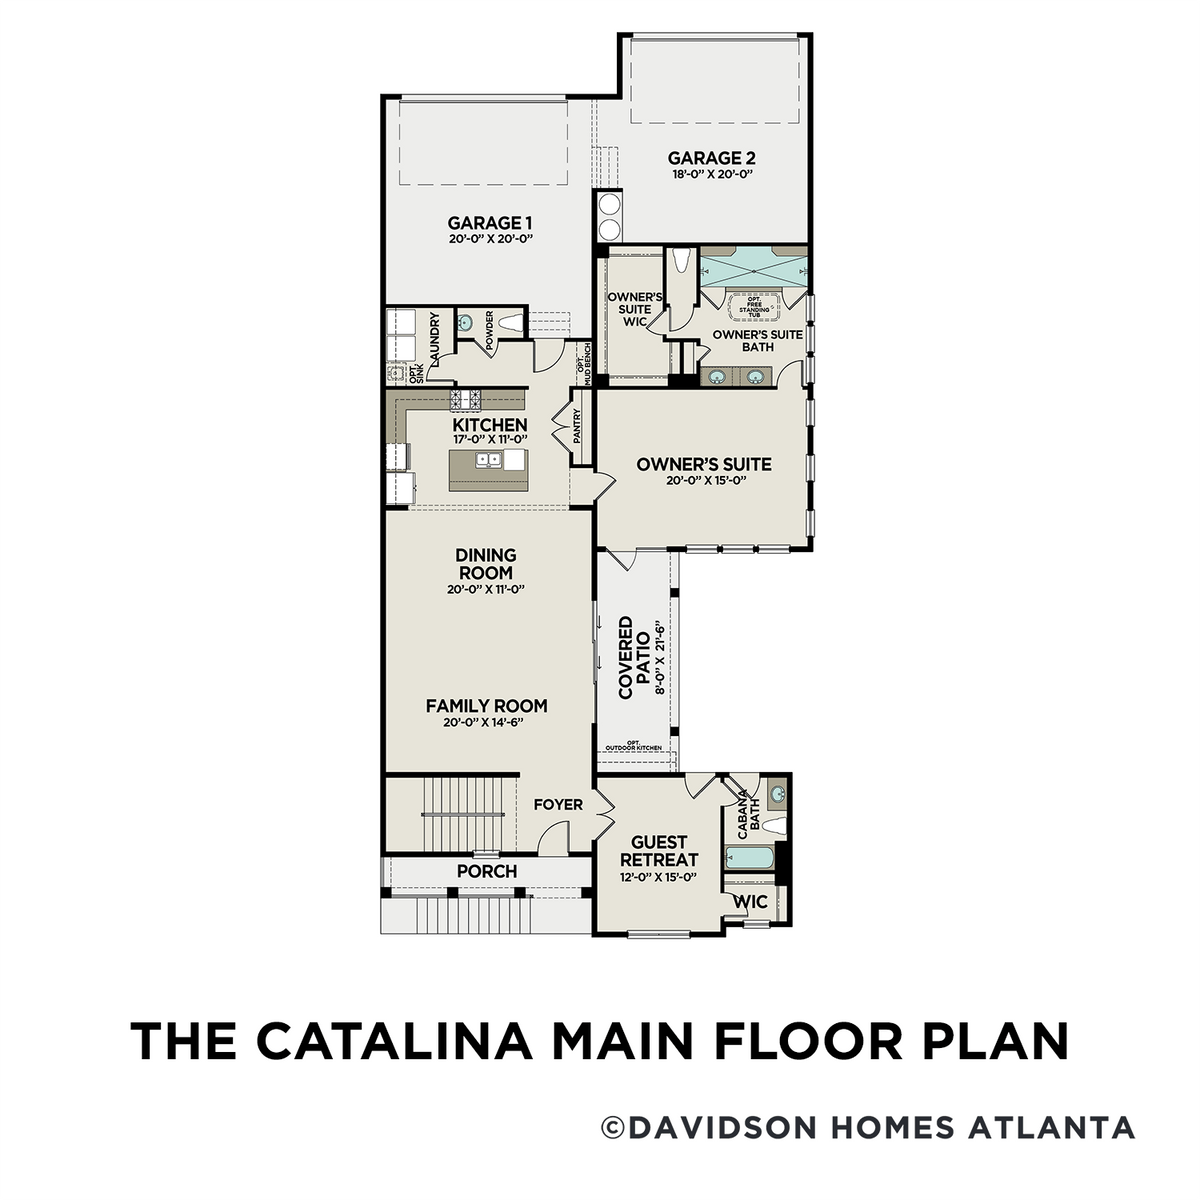 1 - The Catalina B floor plan layout for 2439 Lizdionne Loop in Davidson Homes' Manor Estates community.